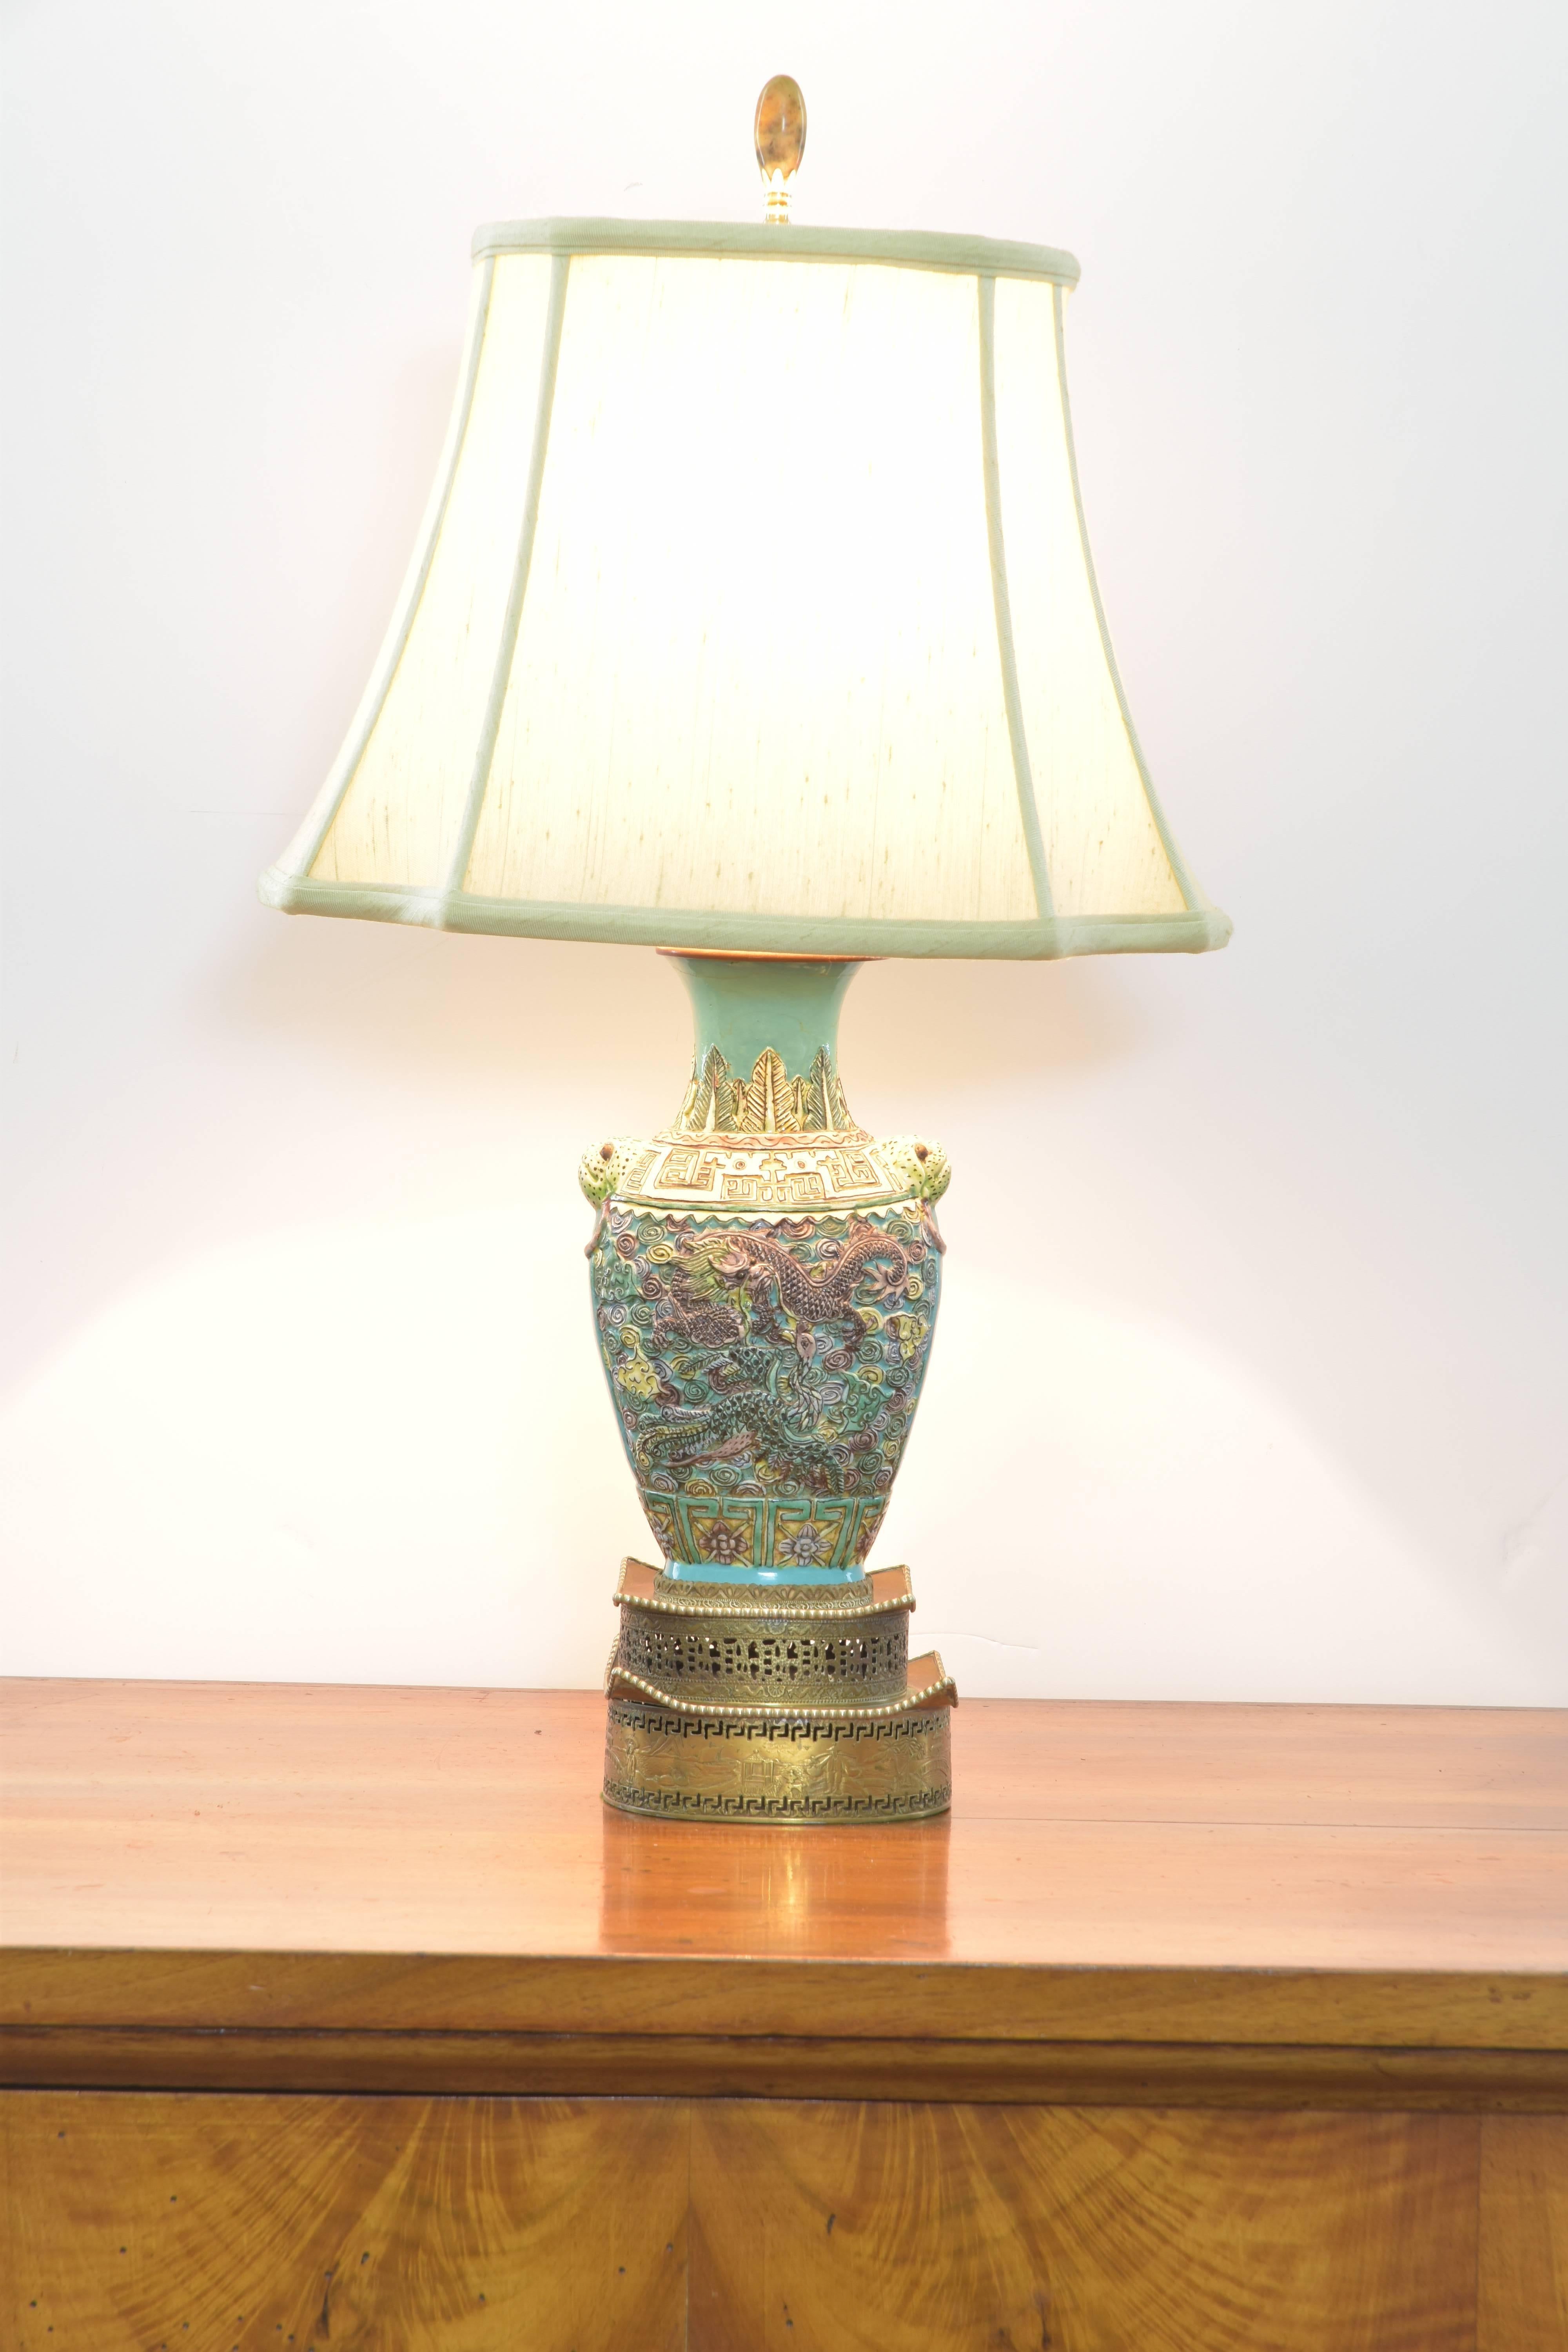 Lovely Chinese porcelain lamp in shades of aqua and pale green on a vintage pagoda form two-tiered brass base. The vase portion of the lamp features dragons and frog-like creatures as handles. The lamp was made in the mid-20th century and the vase